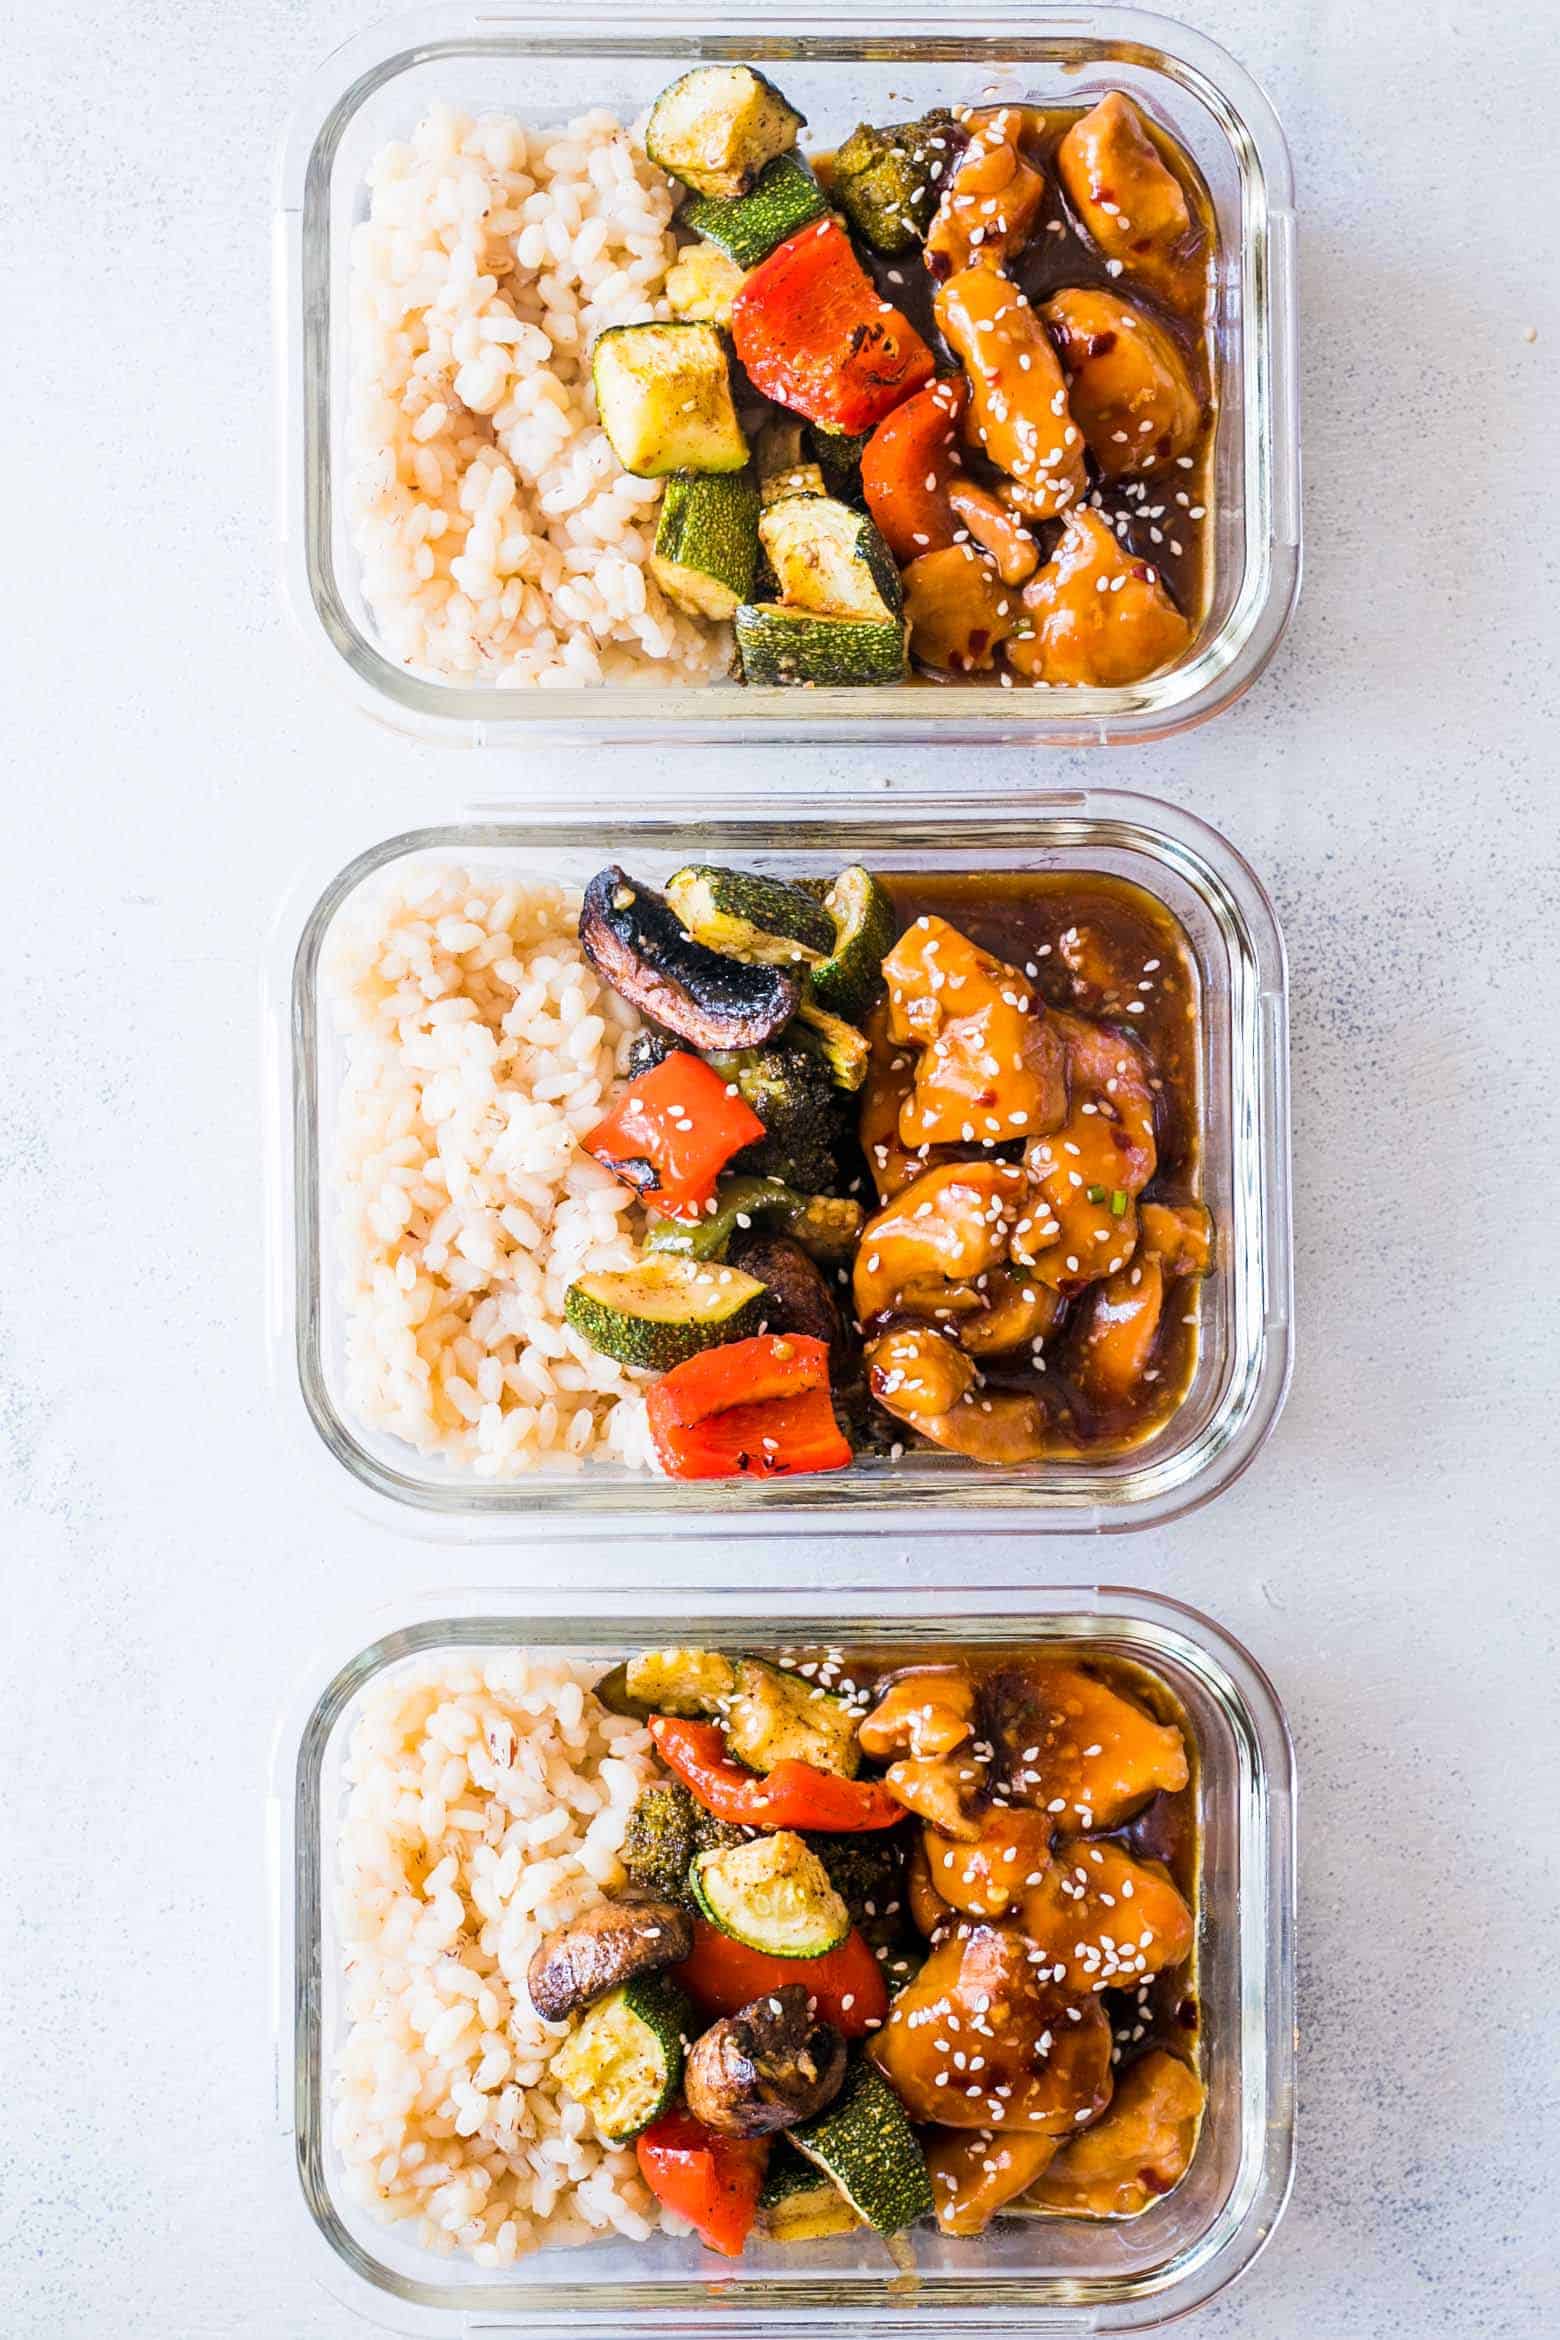 Tasty Teriyaki Chicken Stir-Fry Meal Prep Lunch Boxes are the easiest way to make sure you are ready for for the week ahead. Served with brown rice and grilled vegetables, it's a balanced meal!